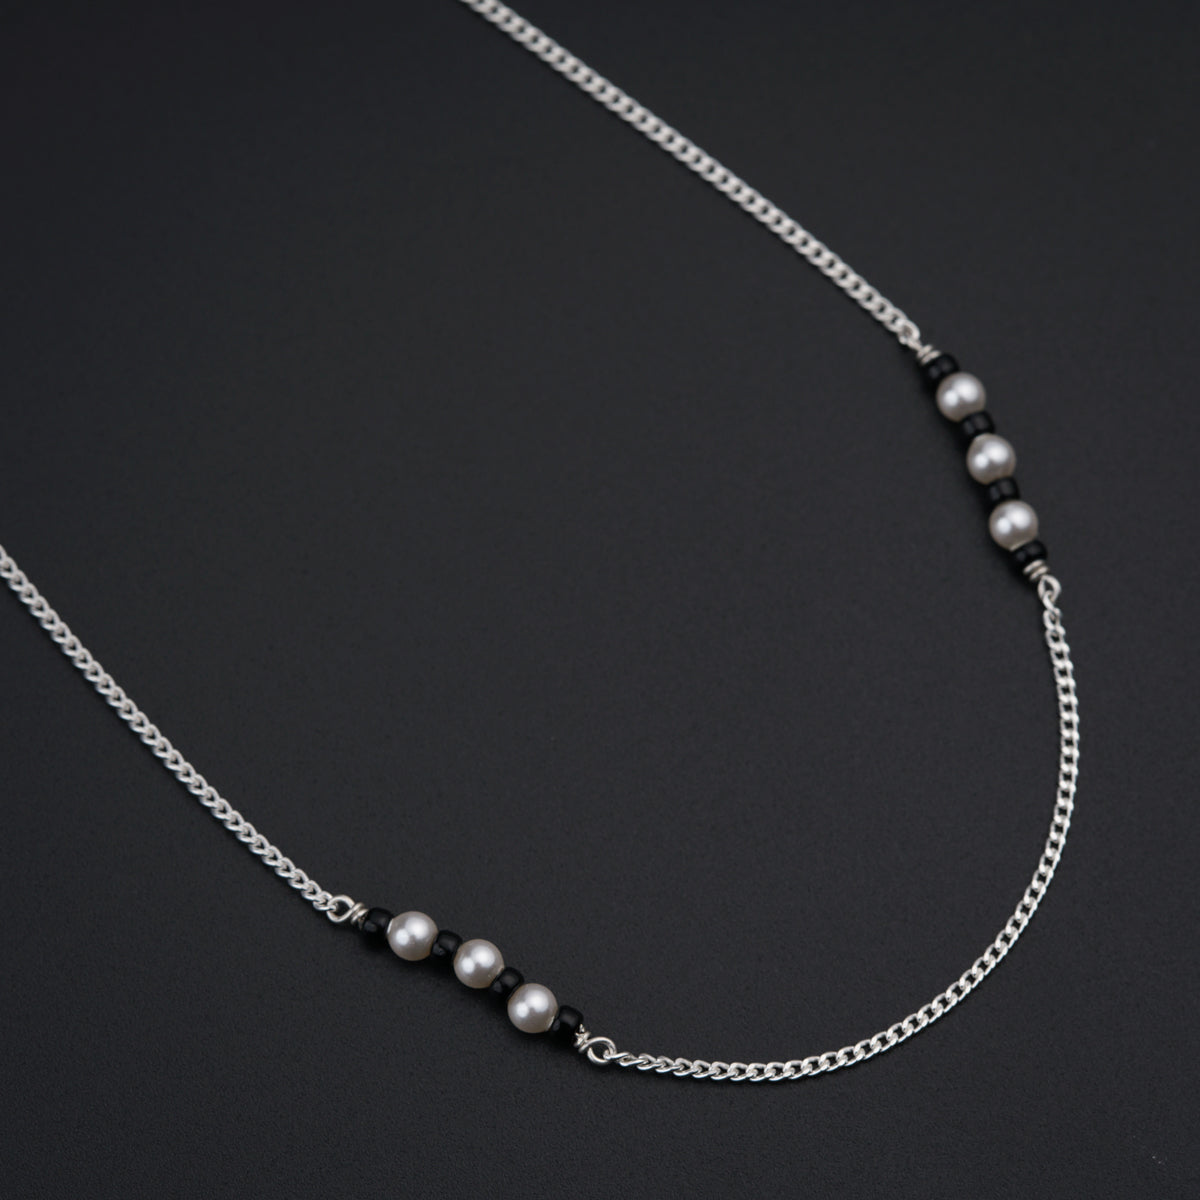 a silver necklace with pearls on a black background